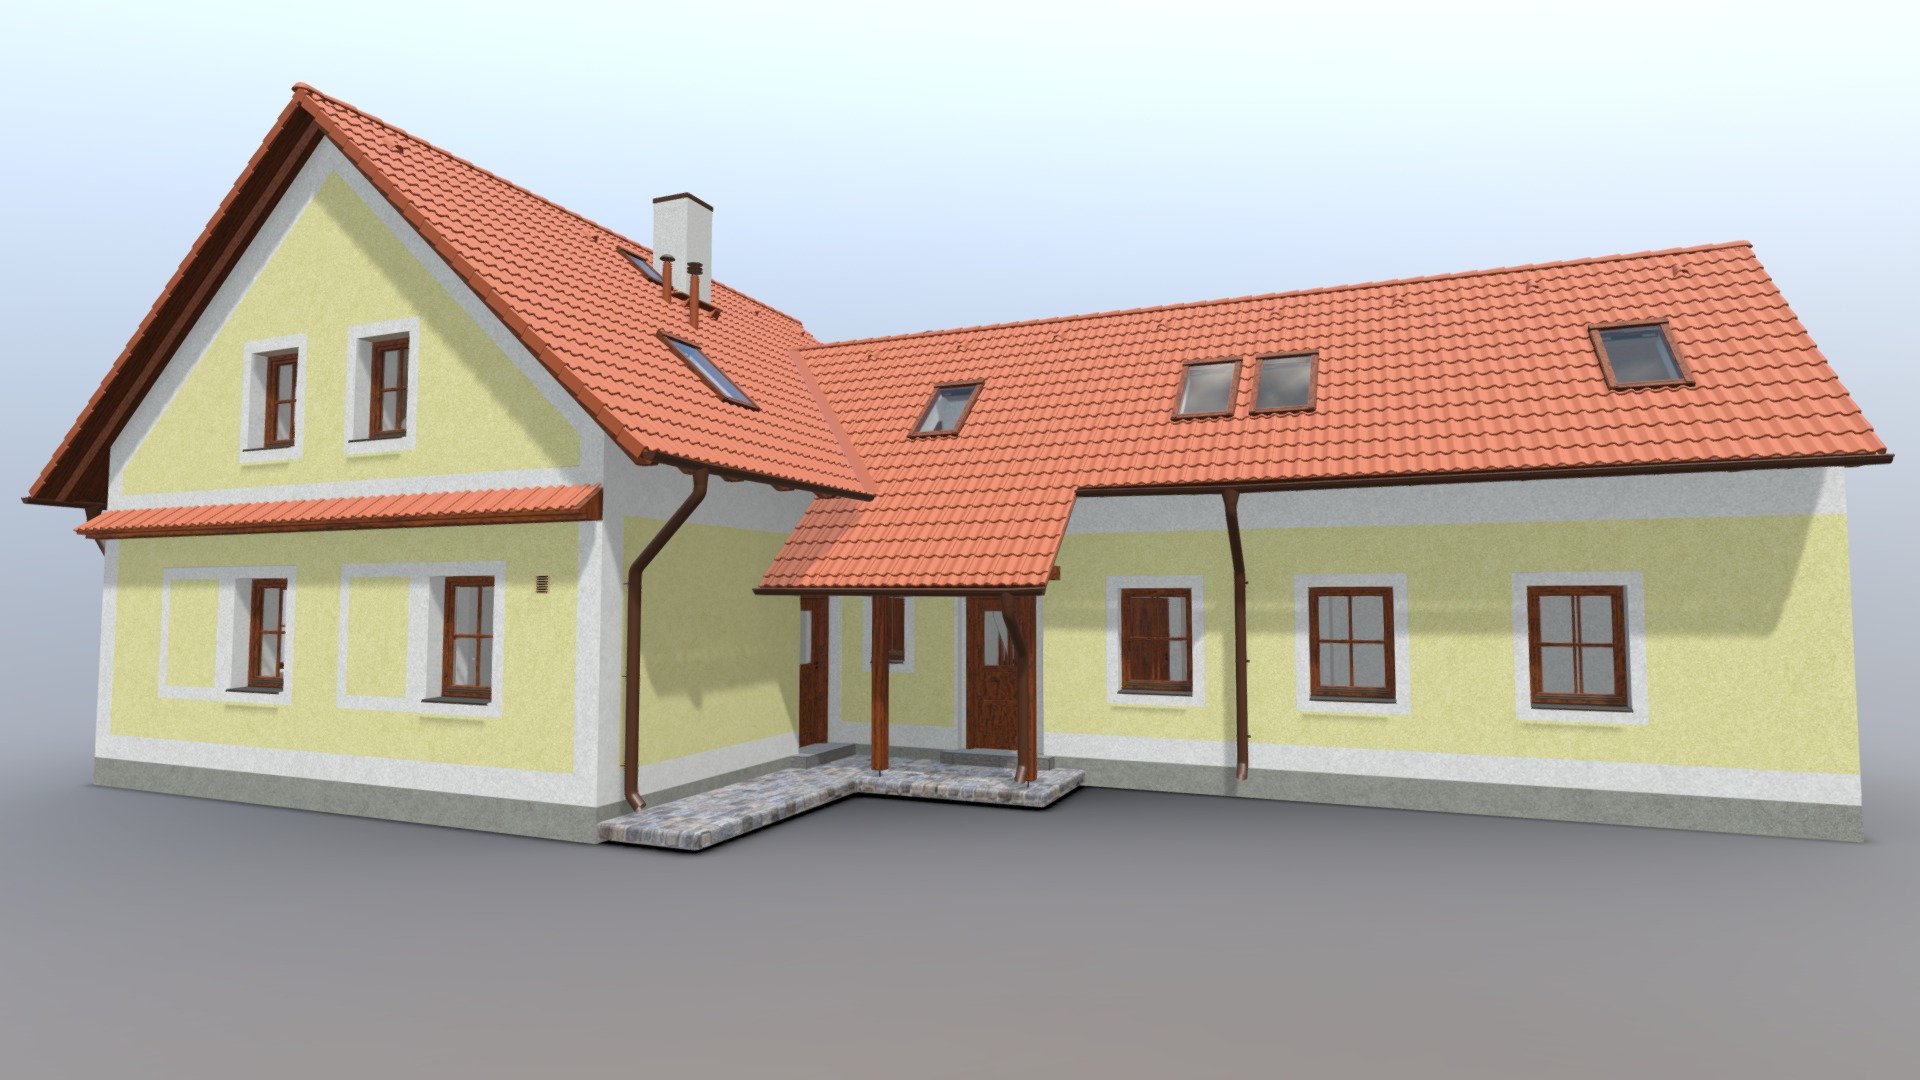 Its a village family house from europe. Interior and exterior. 4k textures 3d model